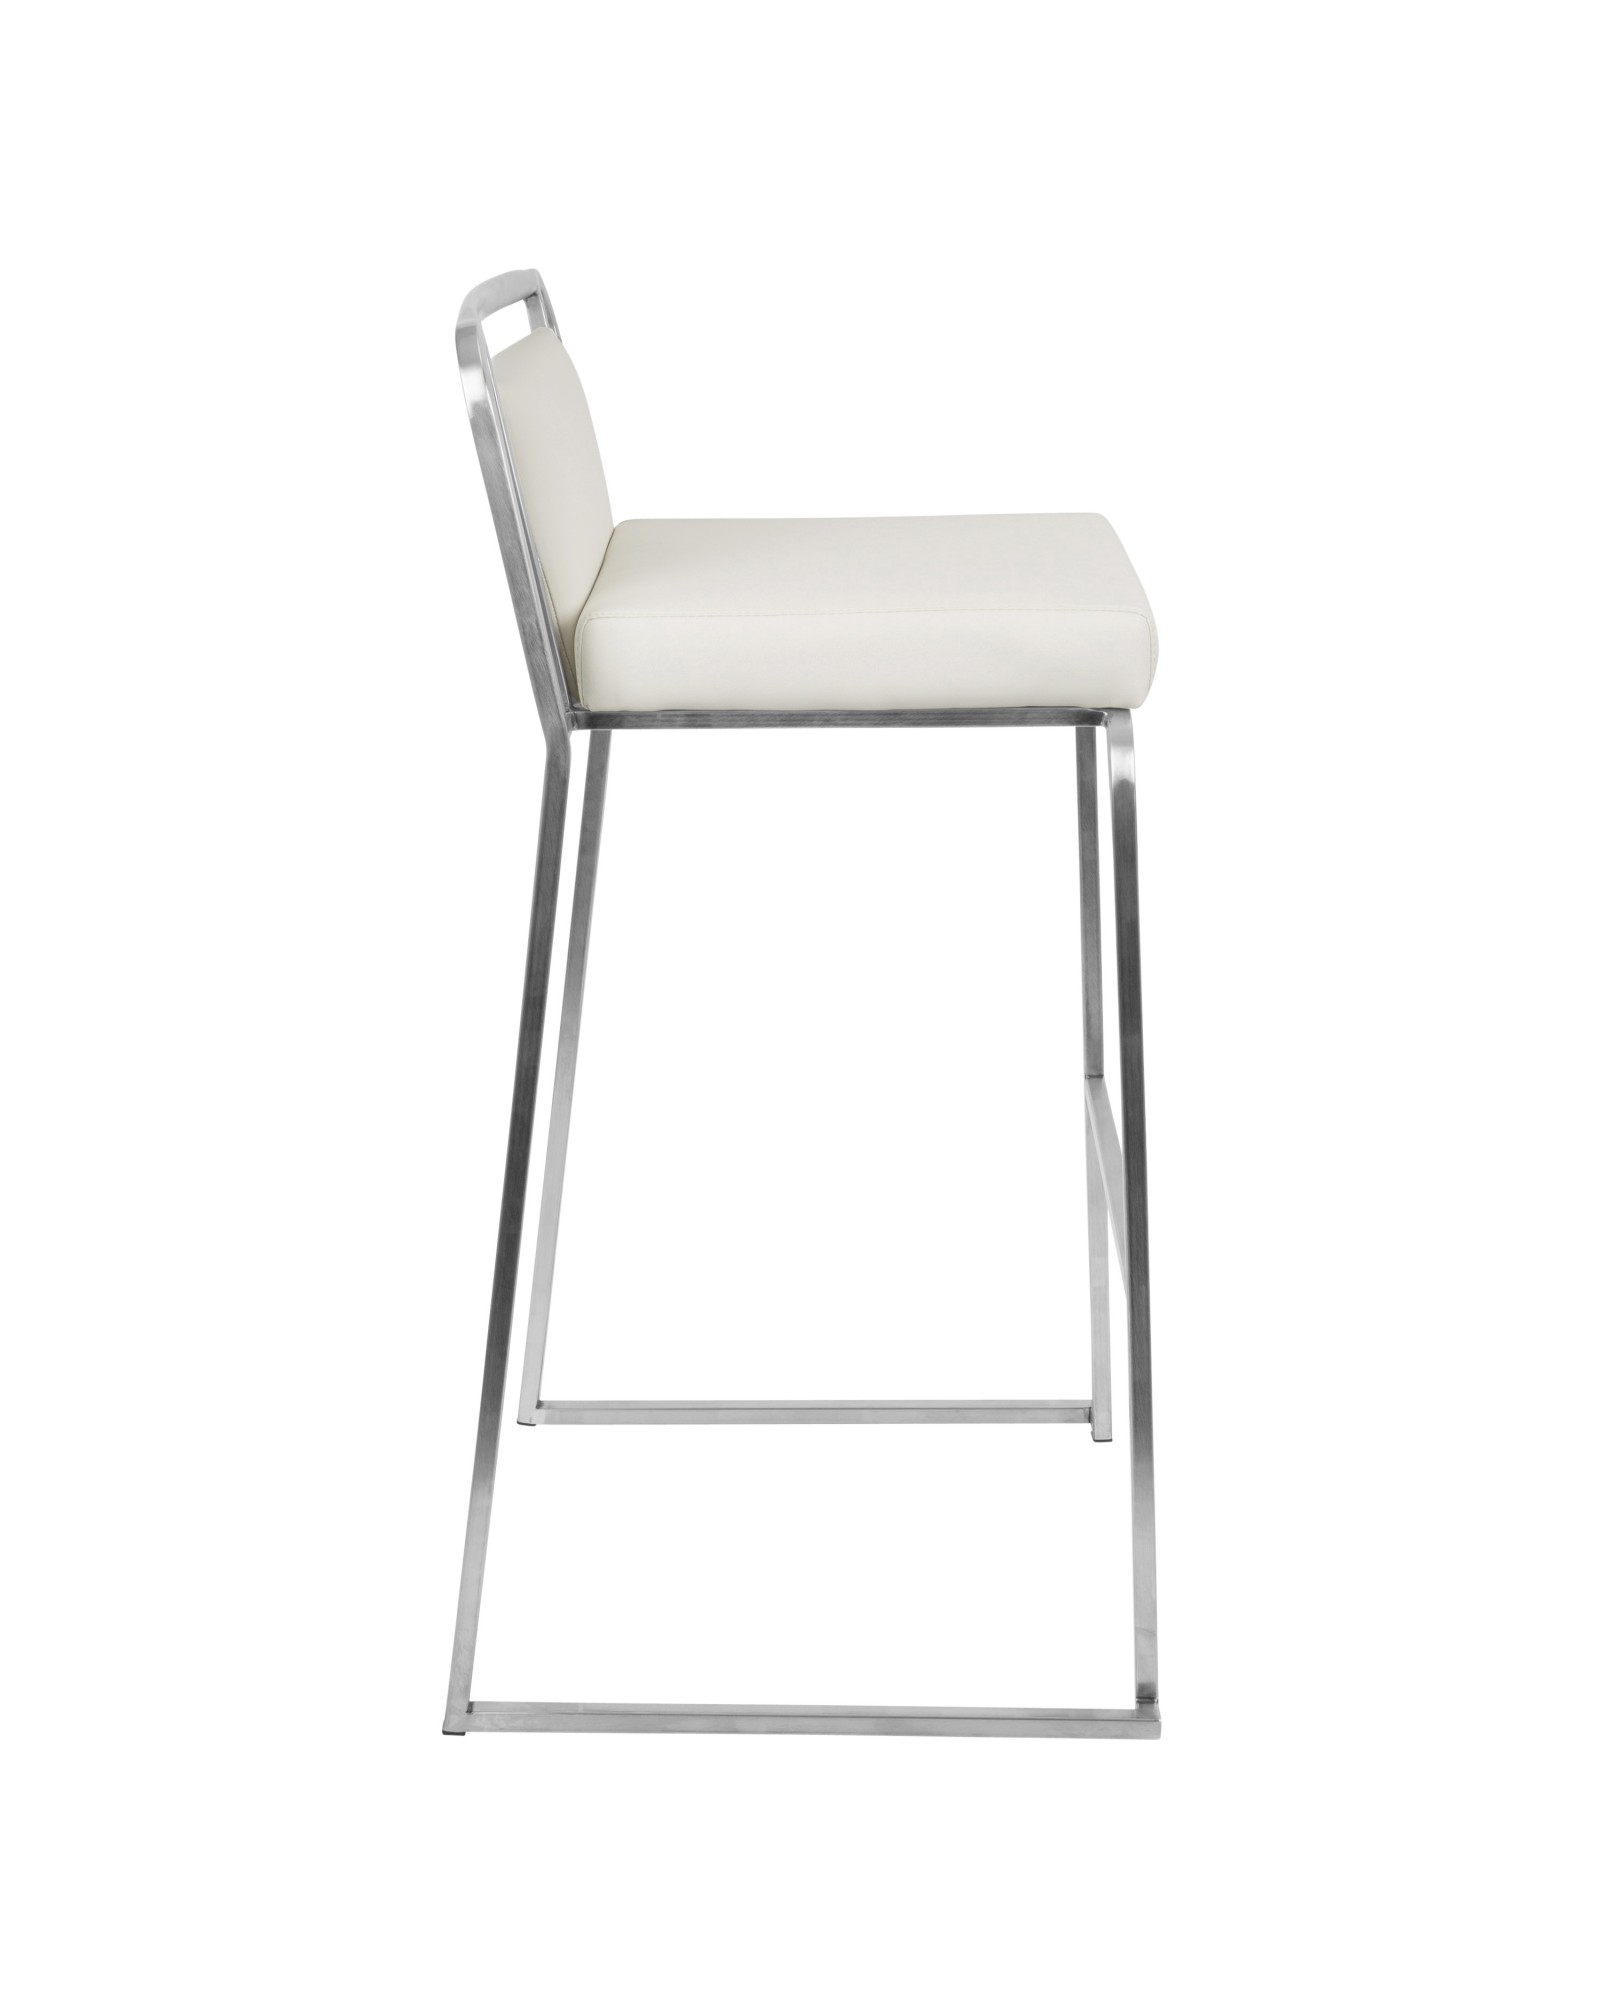 Cascade Contemporary Stackable Barstool in White Faux Leather - Set of 2